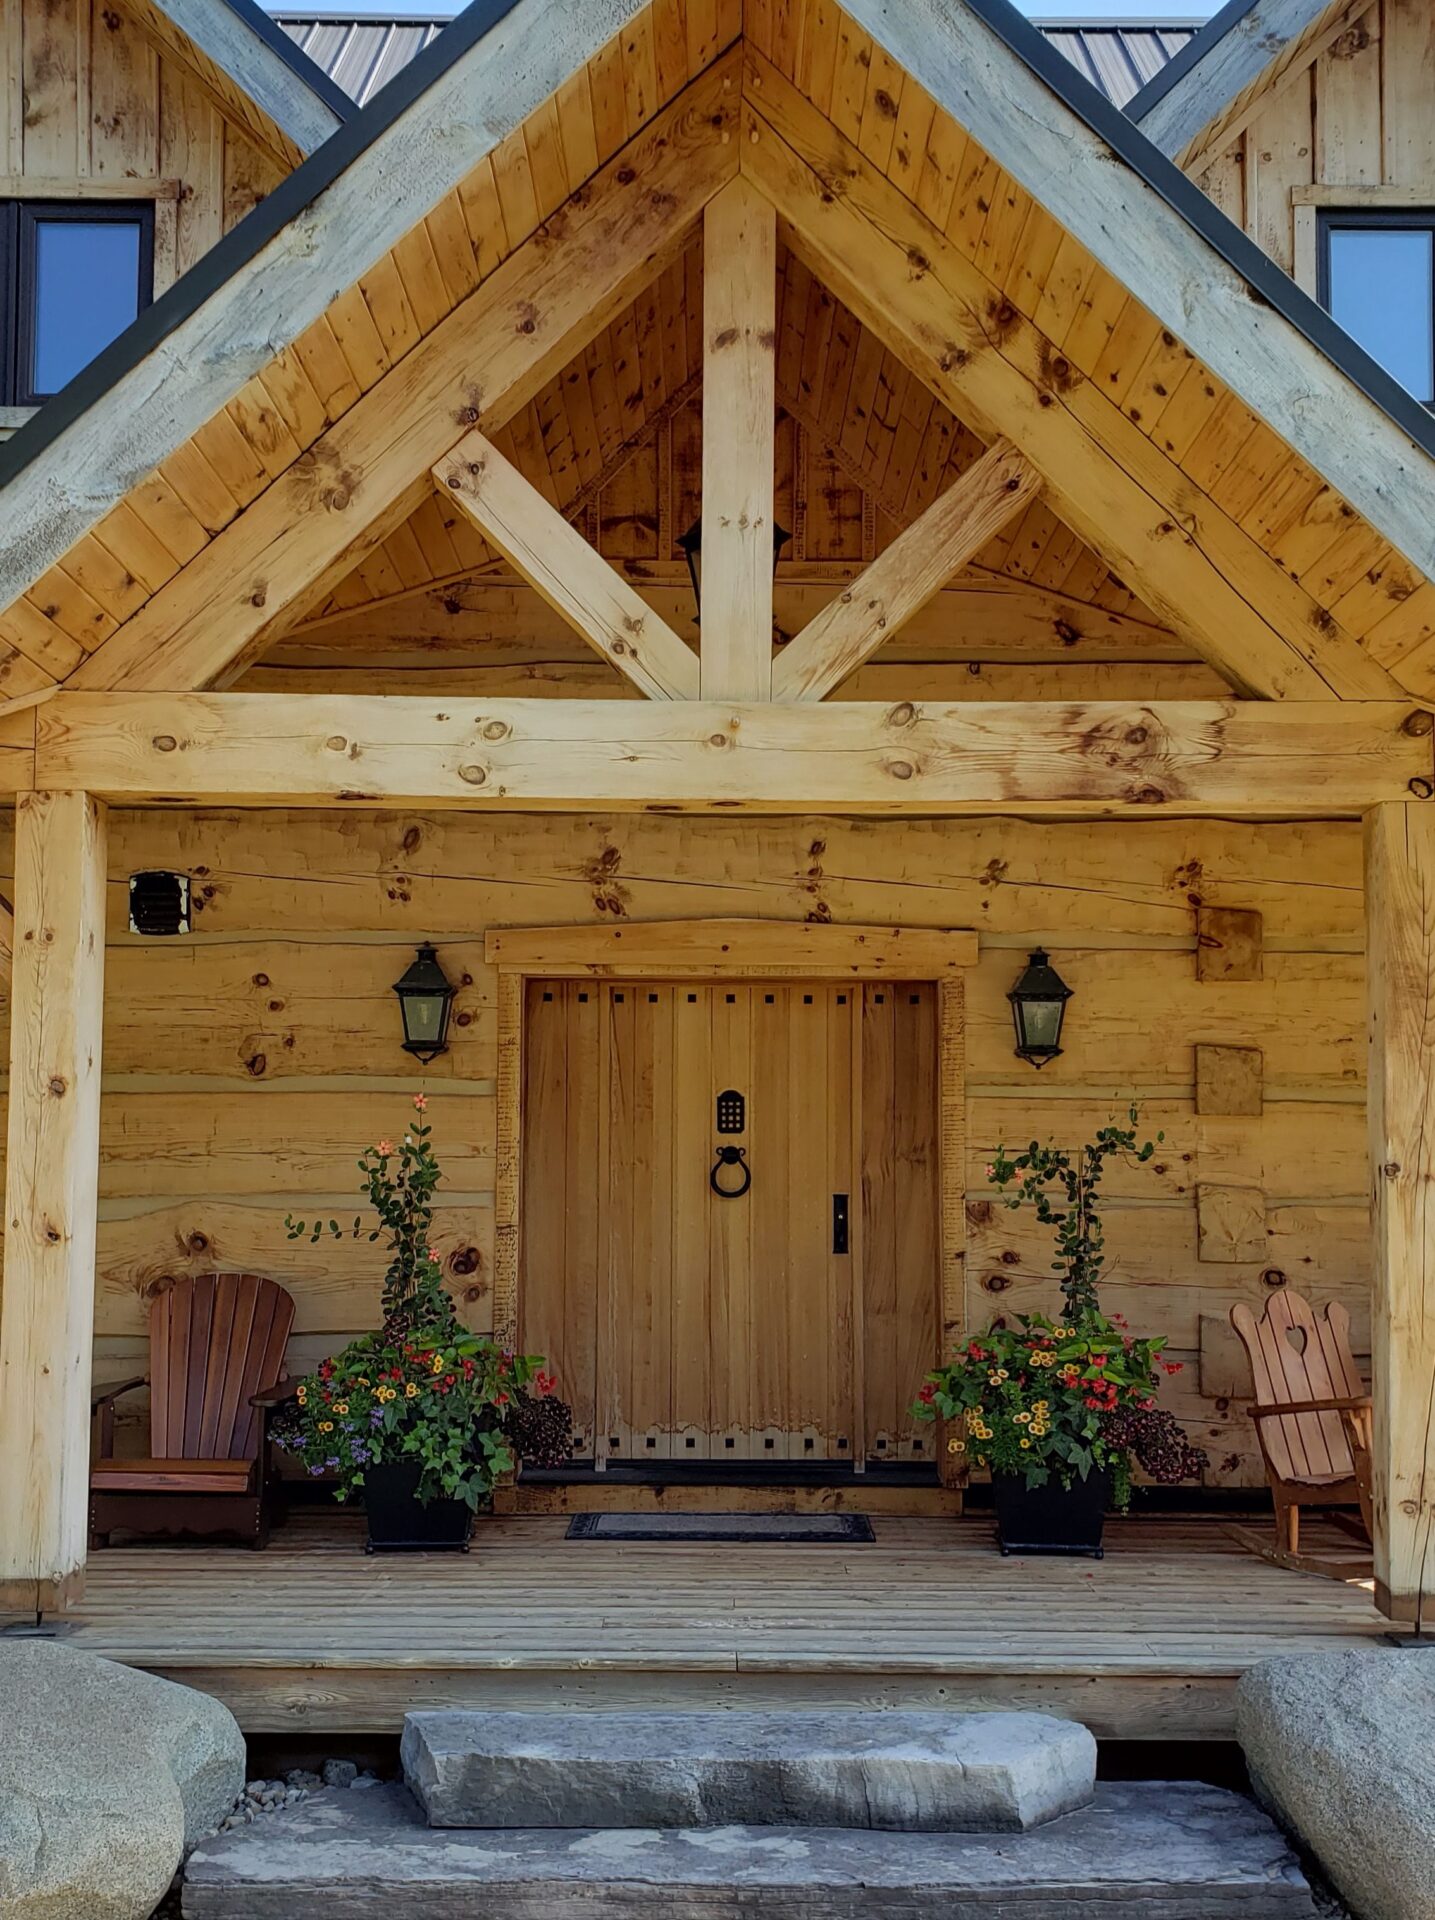 The image shows a wooden cabin entrance featuring a large door adorned with metal hardware, flanked by Adirondack chairs and vibrant potted flowers.